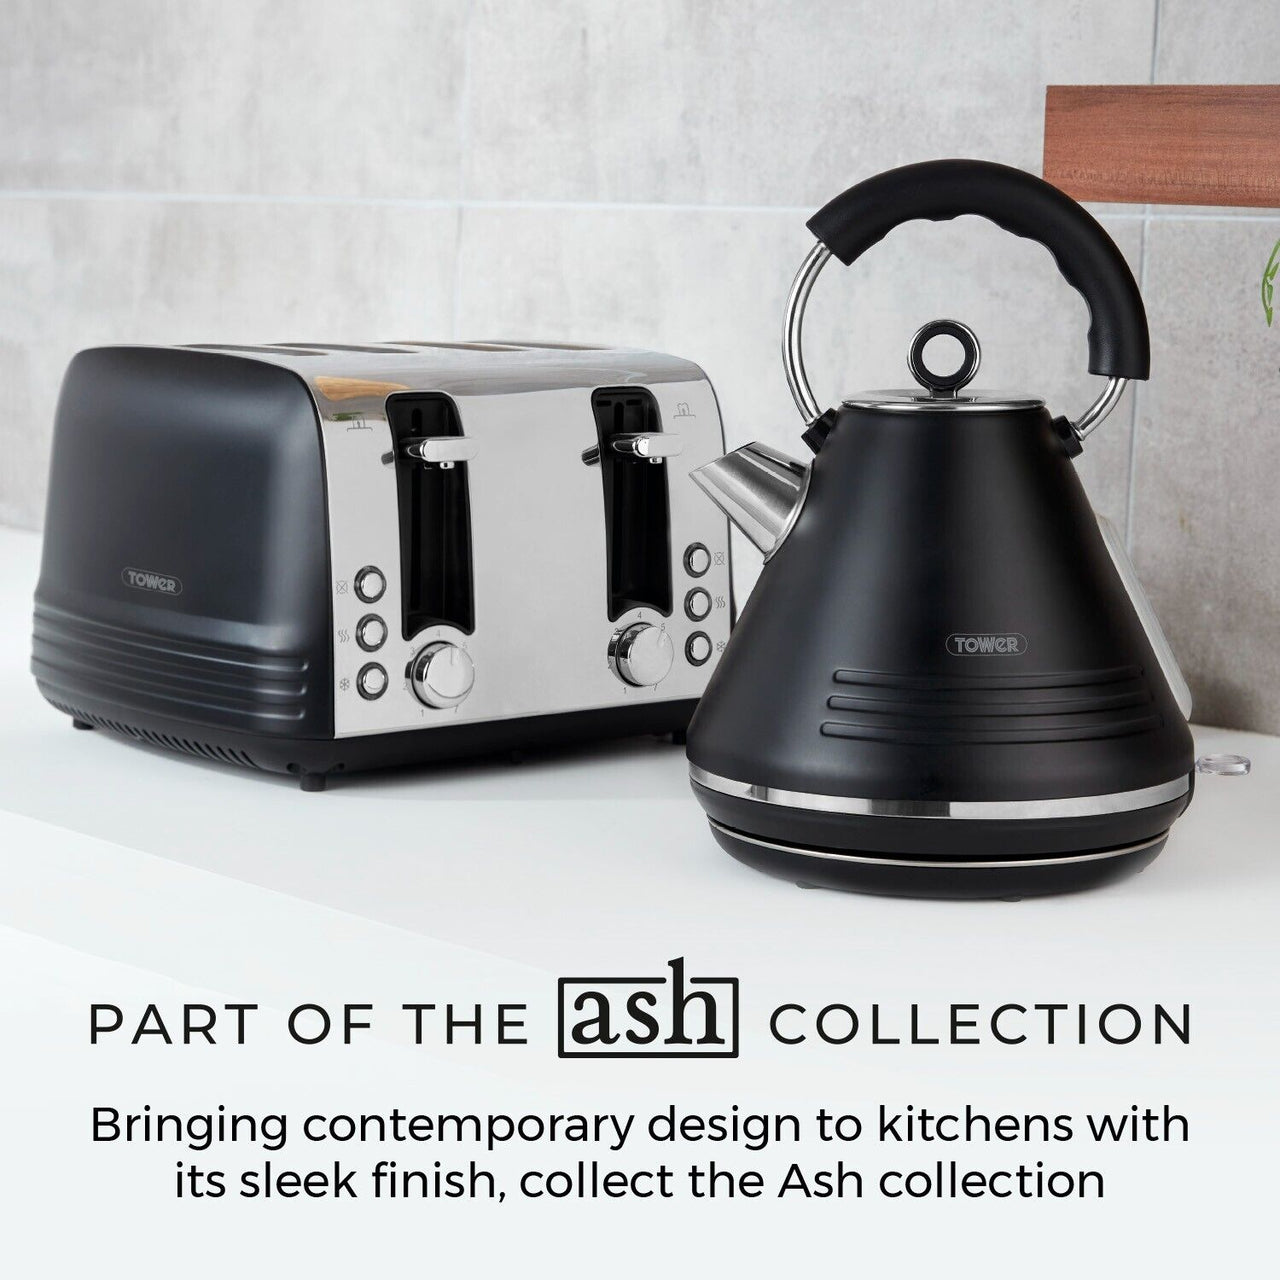 Tower Ash 1.7L 3KW Pyramid Kettle & 4 Slice Toaster Contemporary Set in Black with Chrome Accents